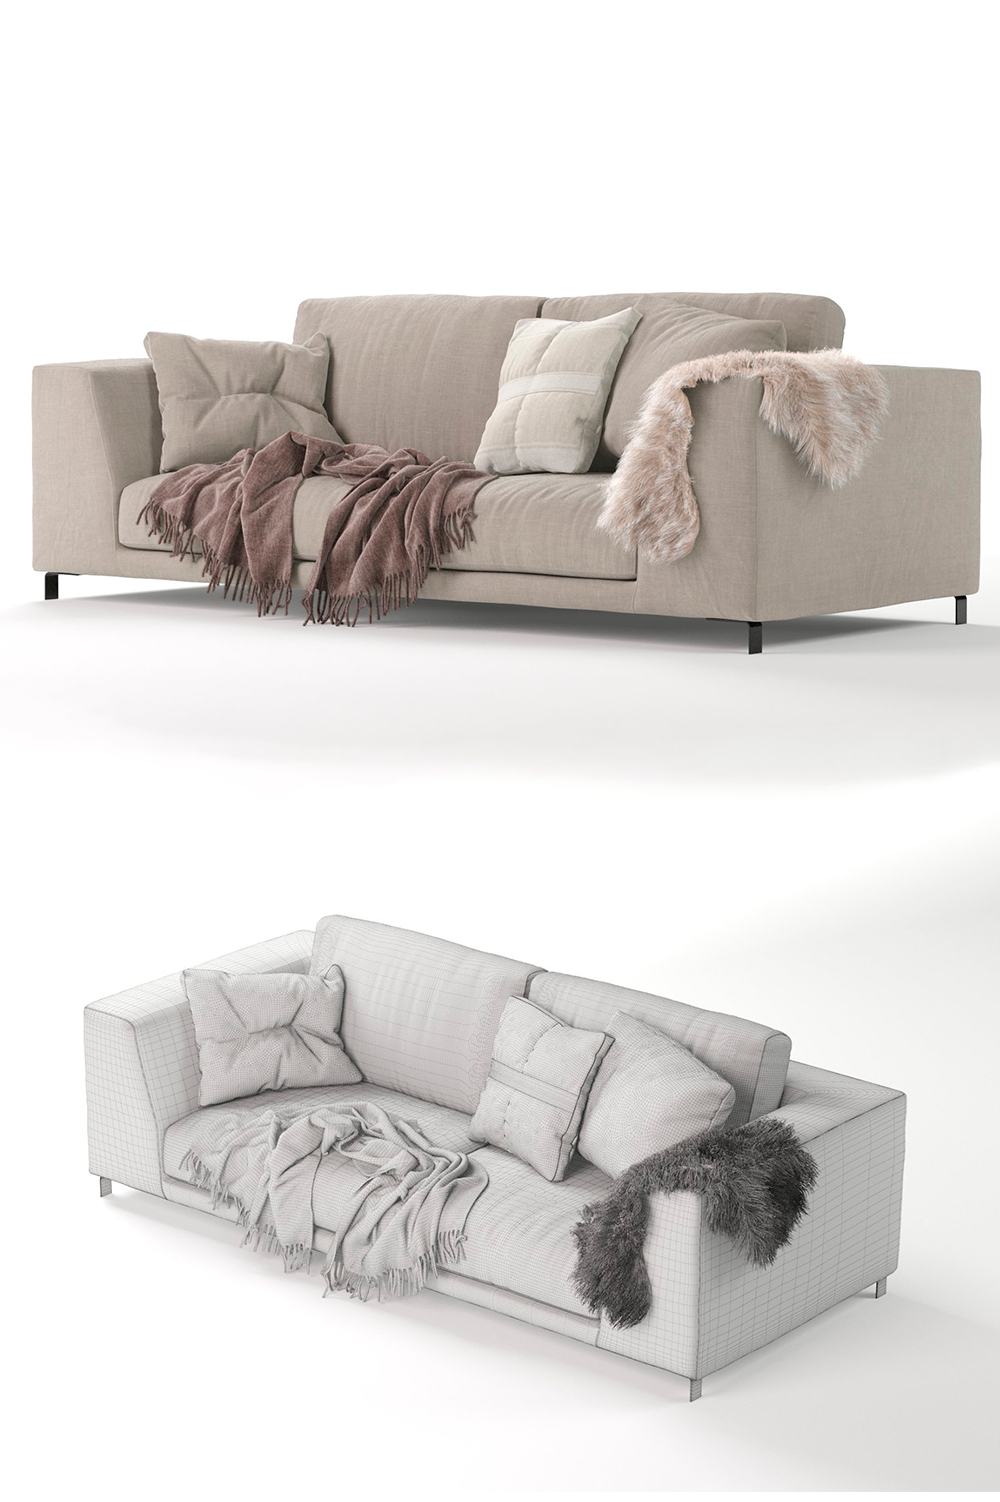 Rendering an adorable 3d model of a sofa